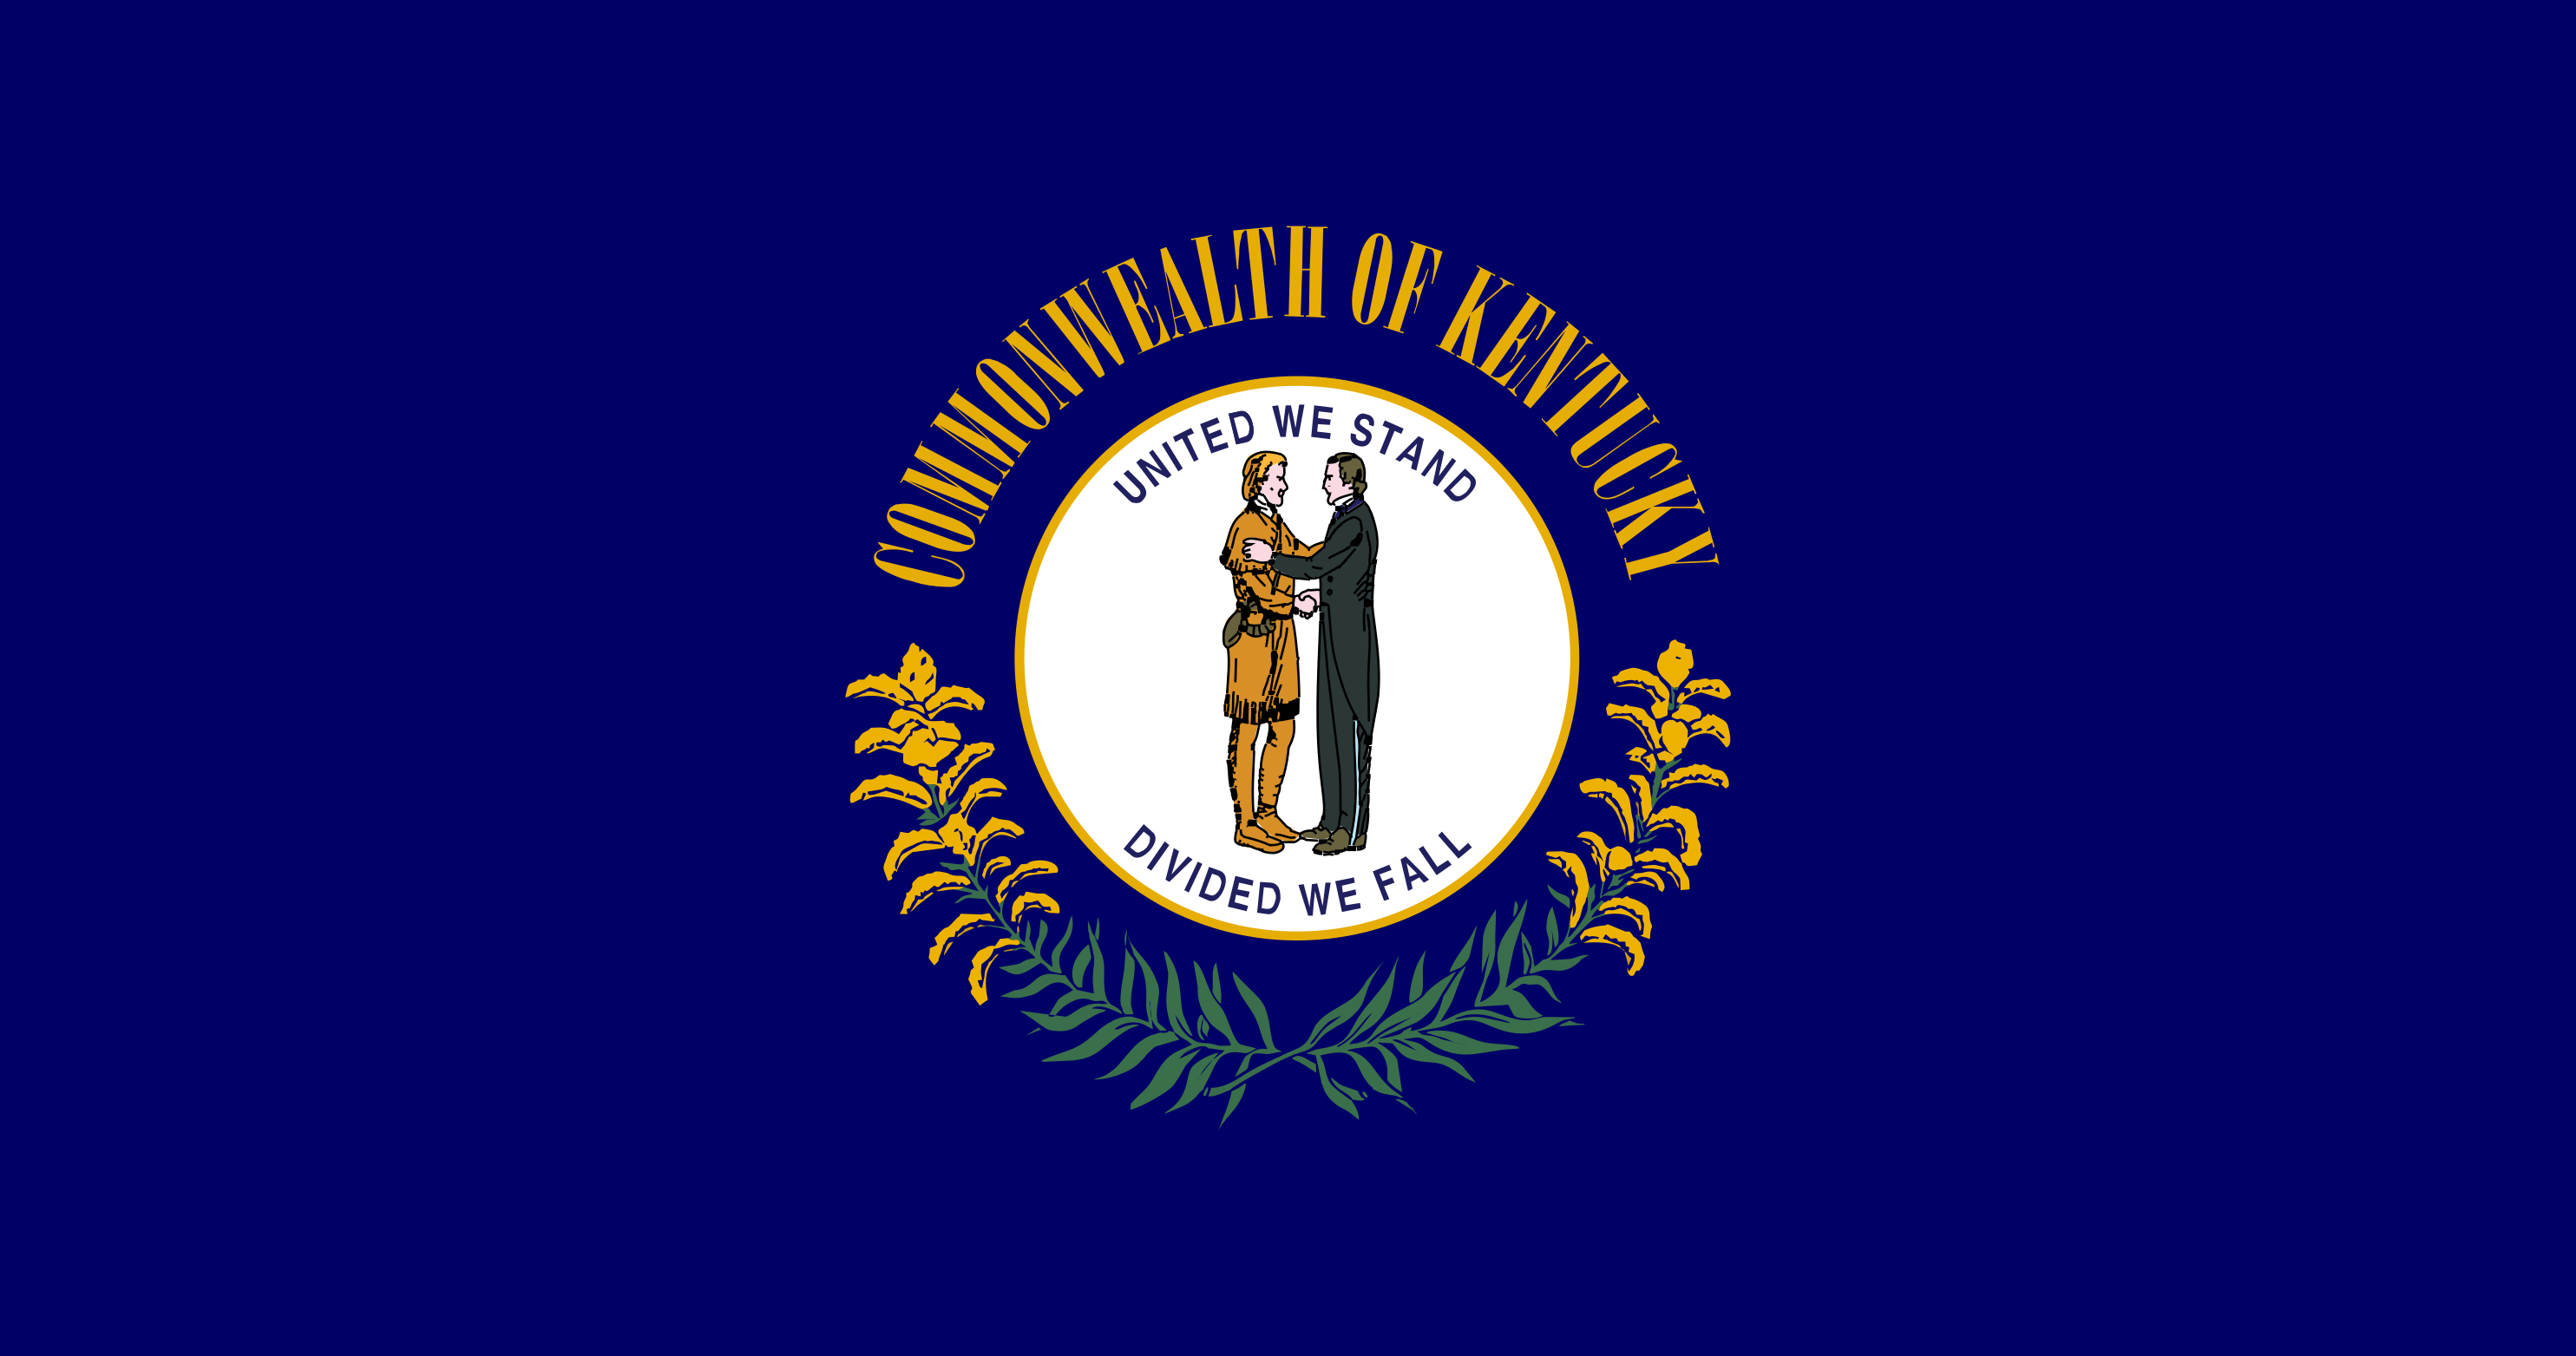 Free Kentucky Flag Images: AI, EPS, GIF, JPG, PDF, PNG, SVG and more!